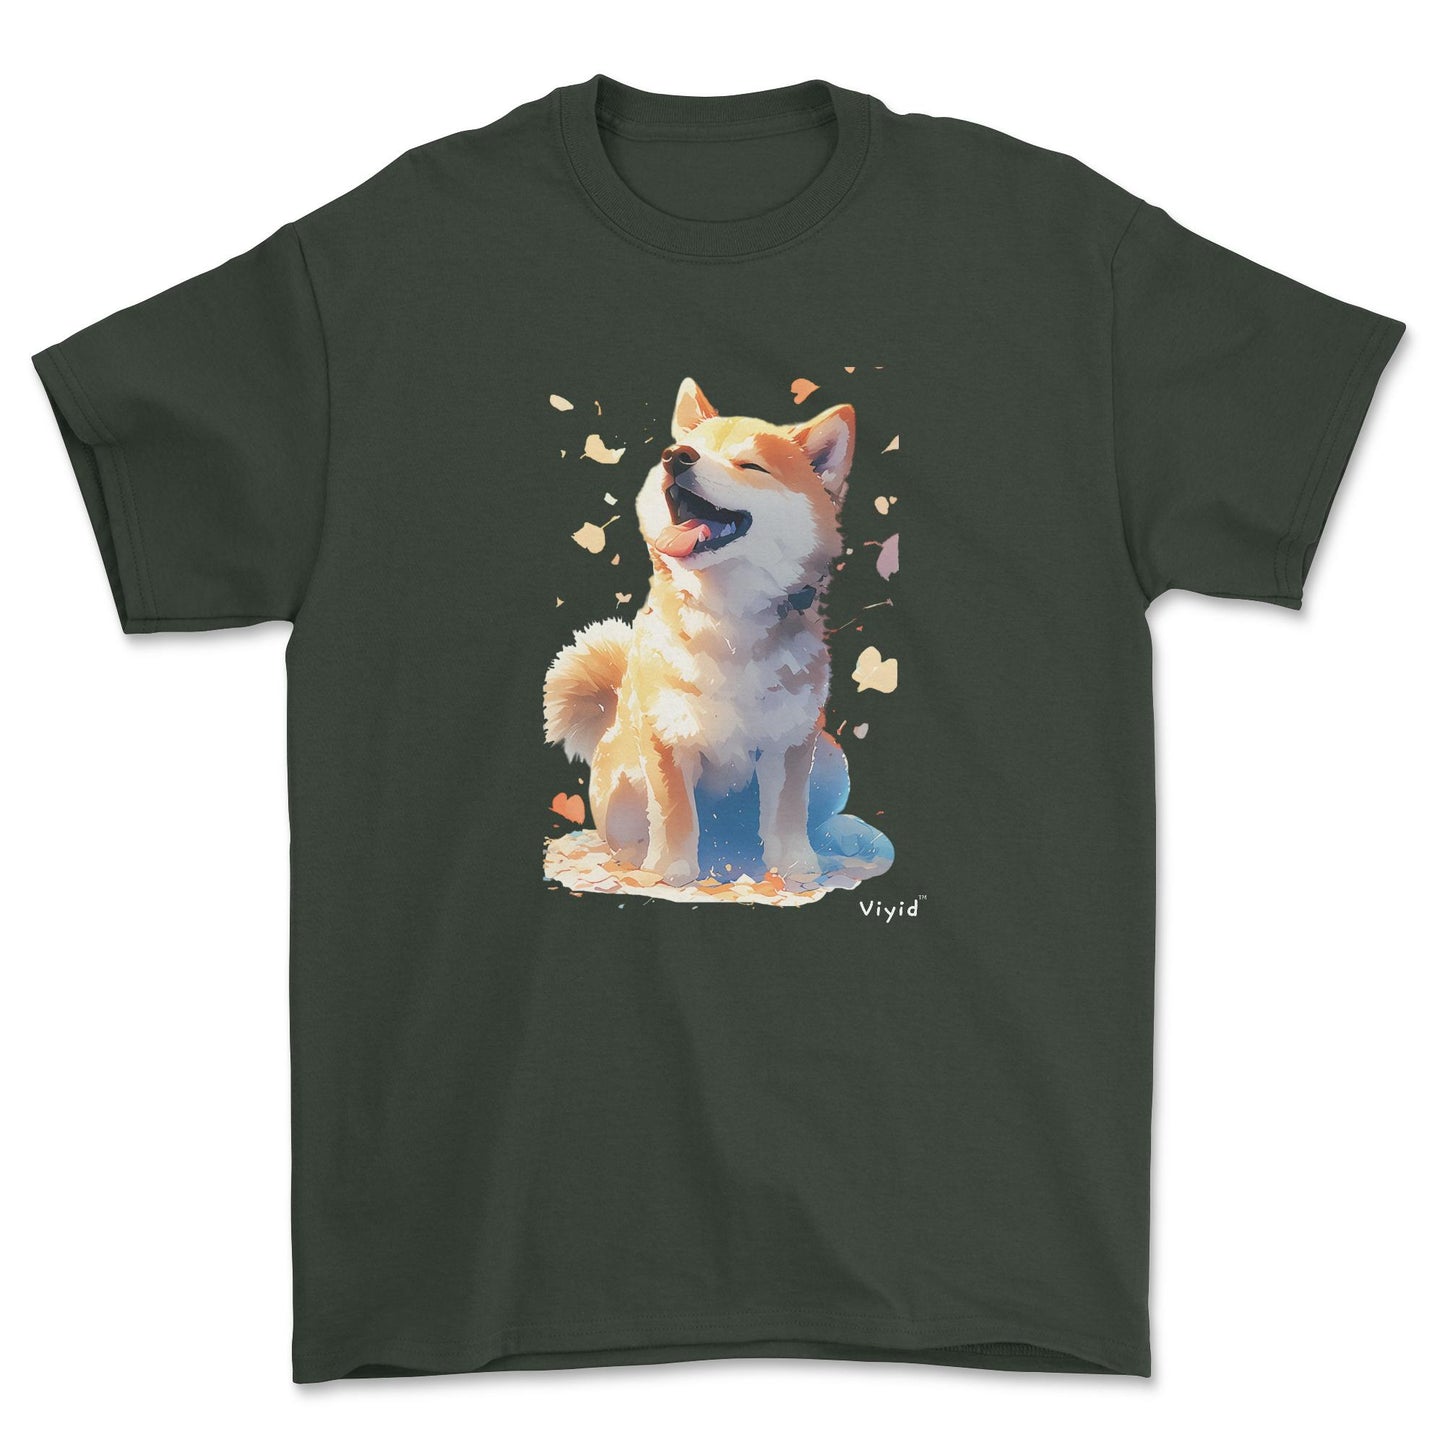 Japanese Shiba Inu adult t-shirt forest green